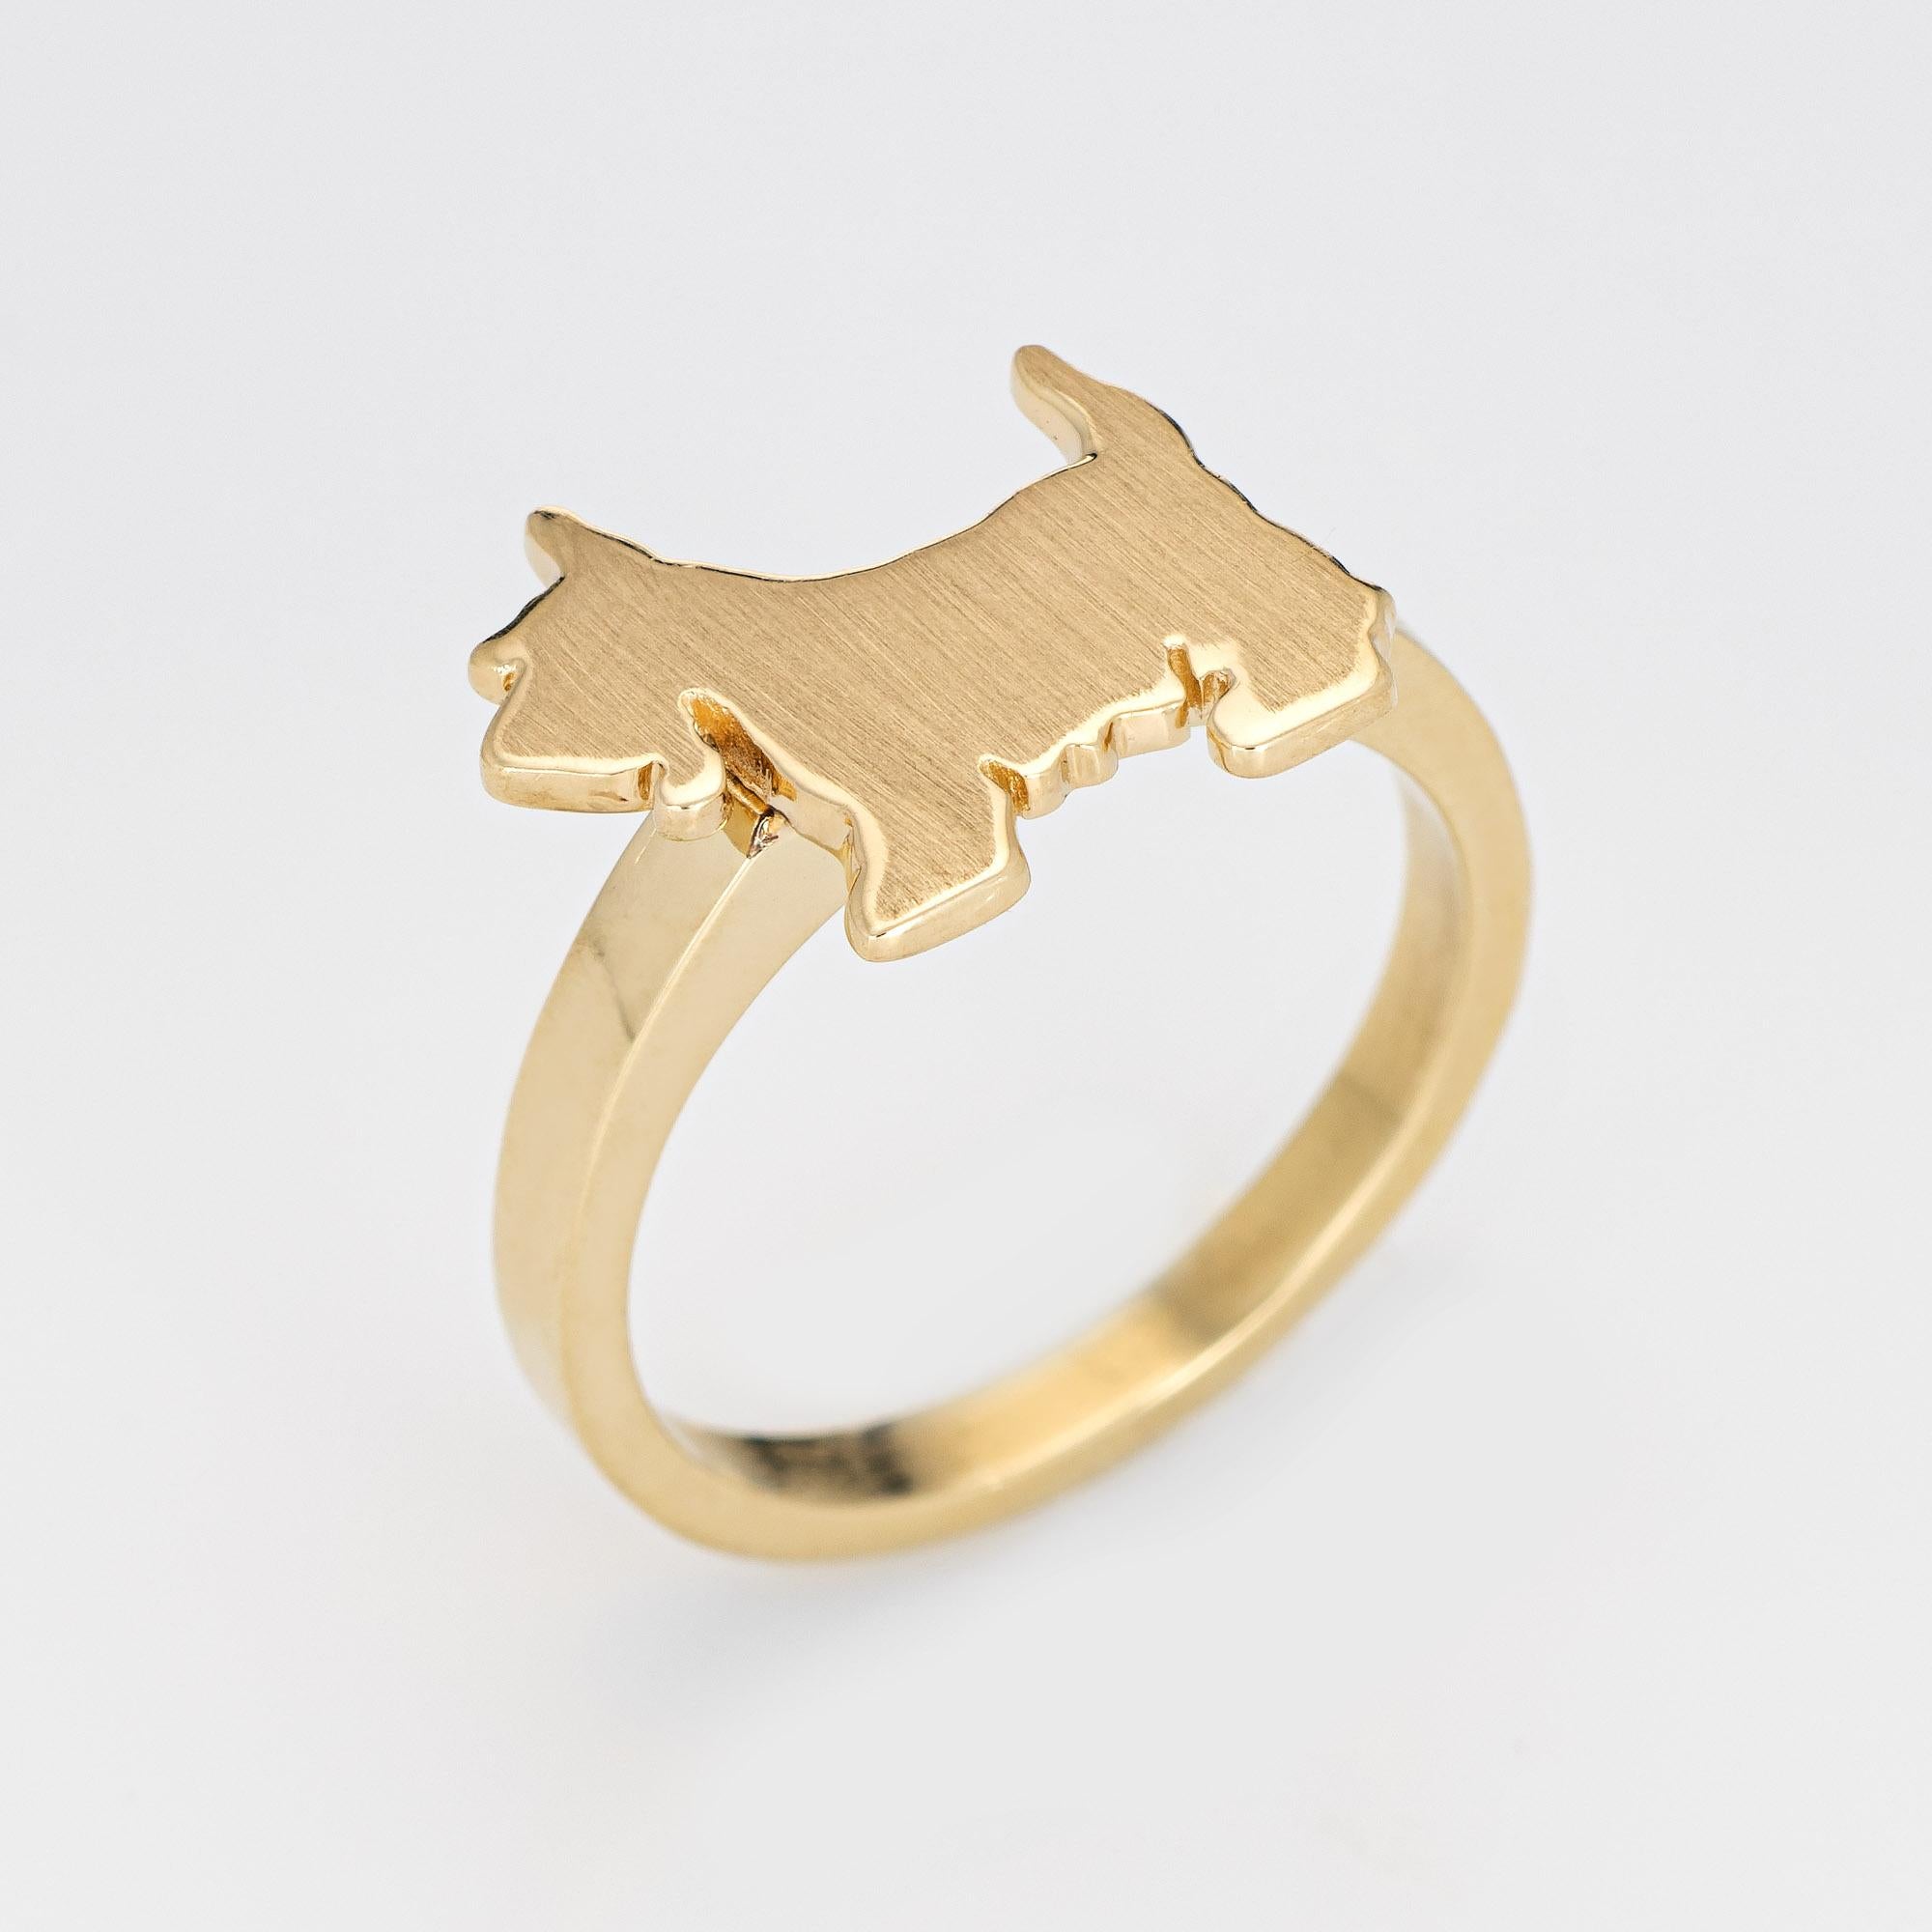 Originally a vintage stick pin (circa 1950s to 1960s), the scotty dog is crafted in 14 karat yellow gold.

The ring is mounted with the original stick pin. Our jeweler rounded the stick pin into a band for the finger. The beautifully detailed